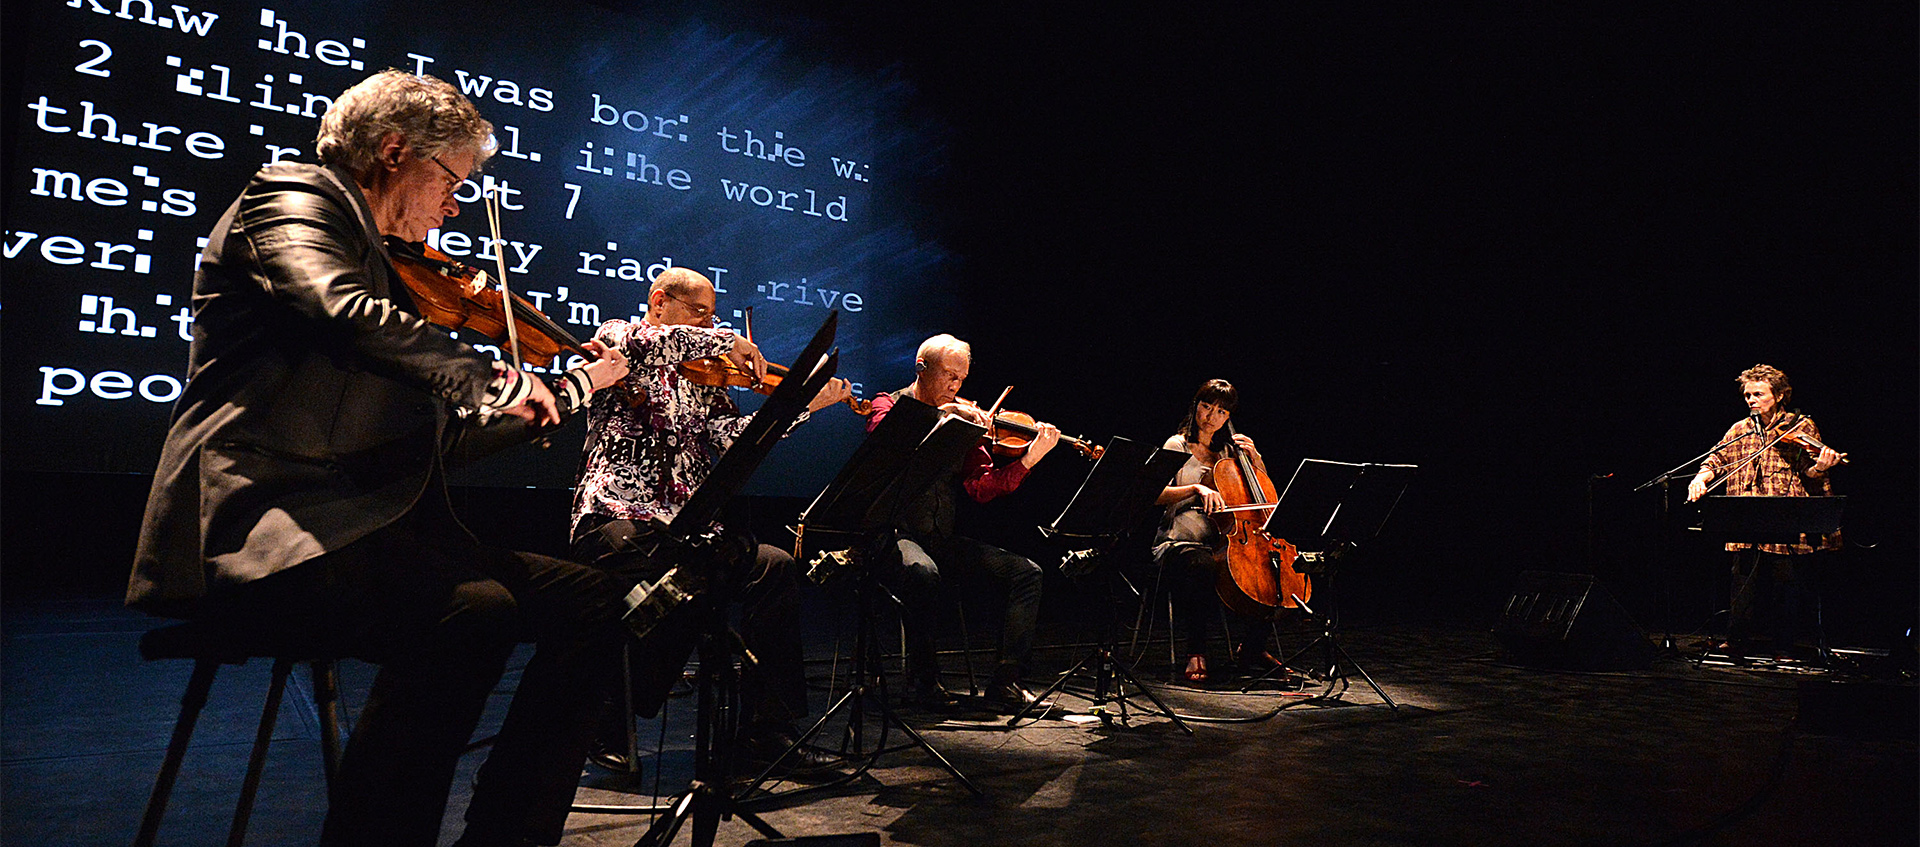 kronos quartet and laurie anderson performing on stage